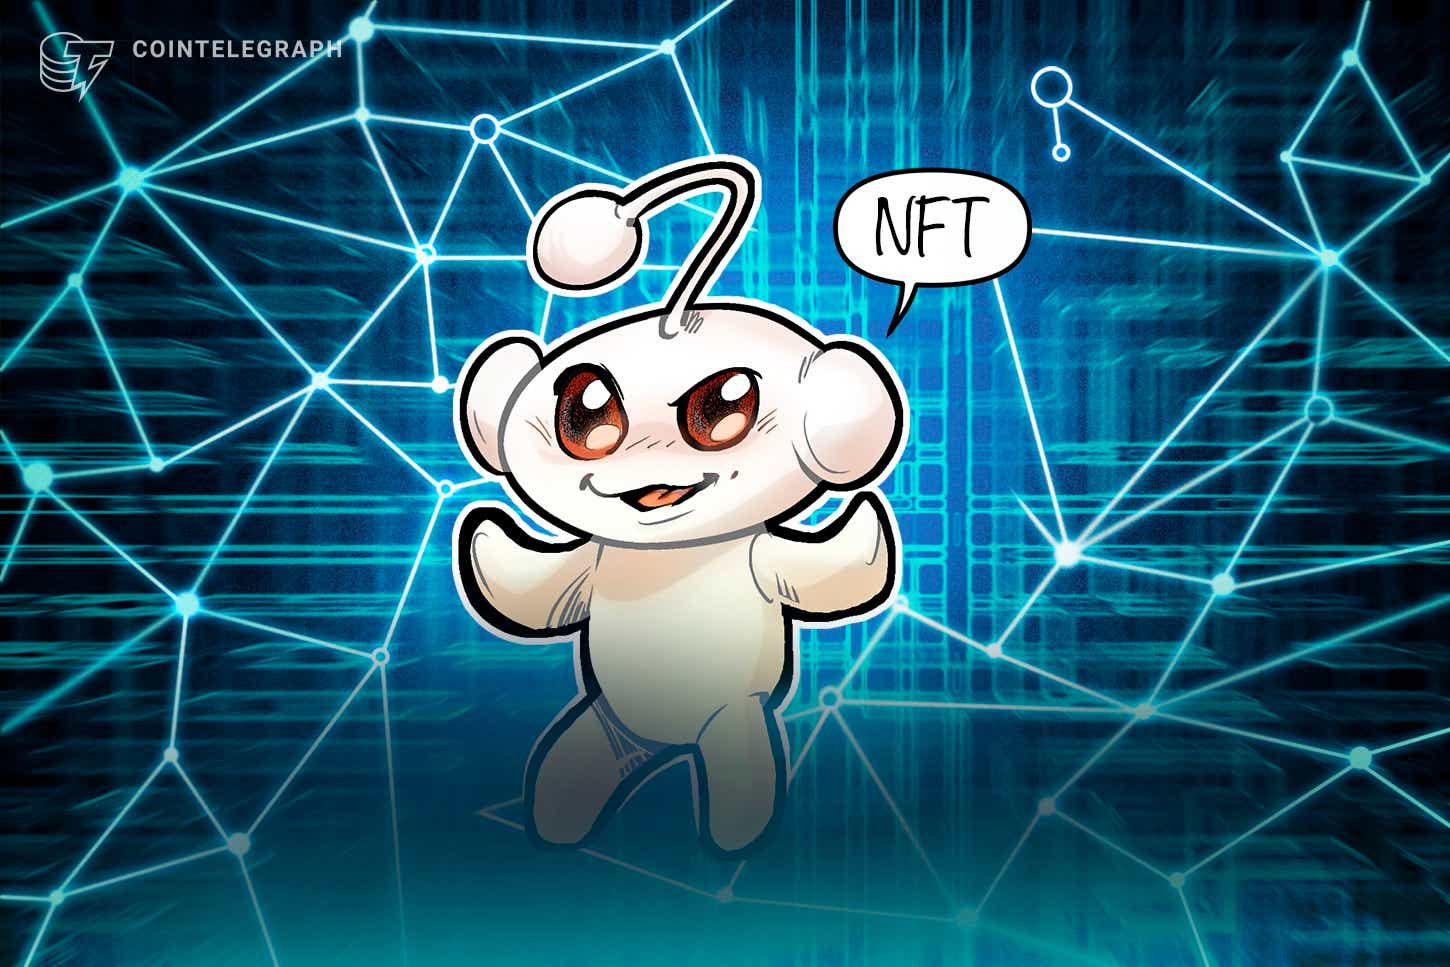 reddit is testing out nft profile pics but no decisions have been made